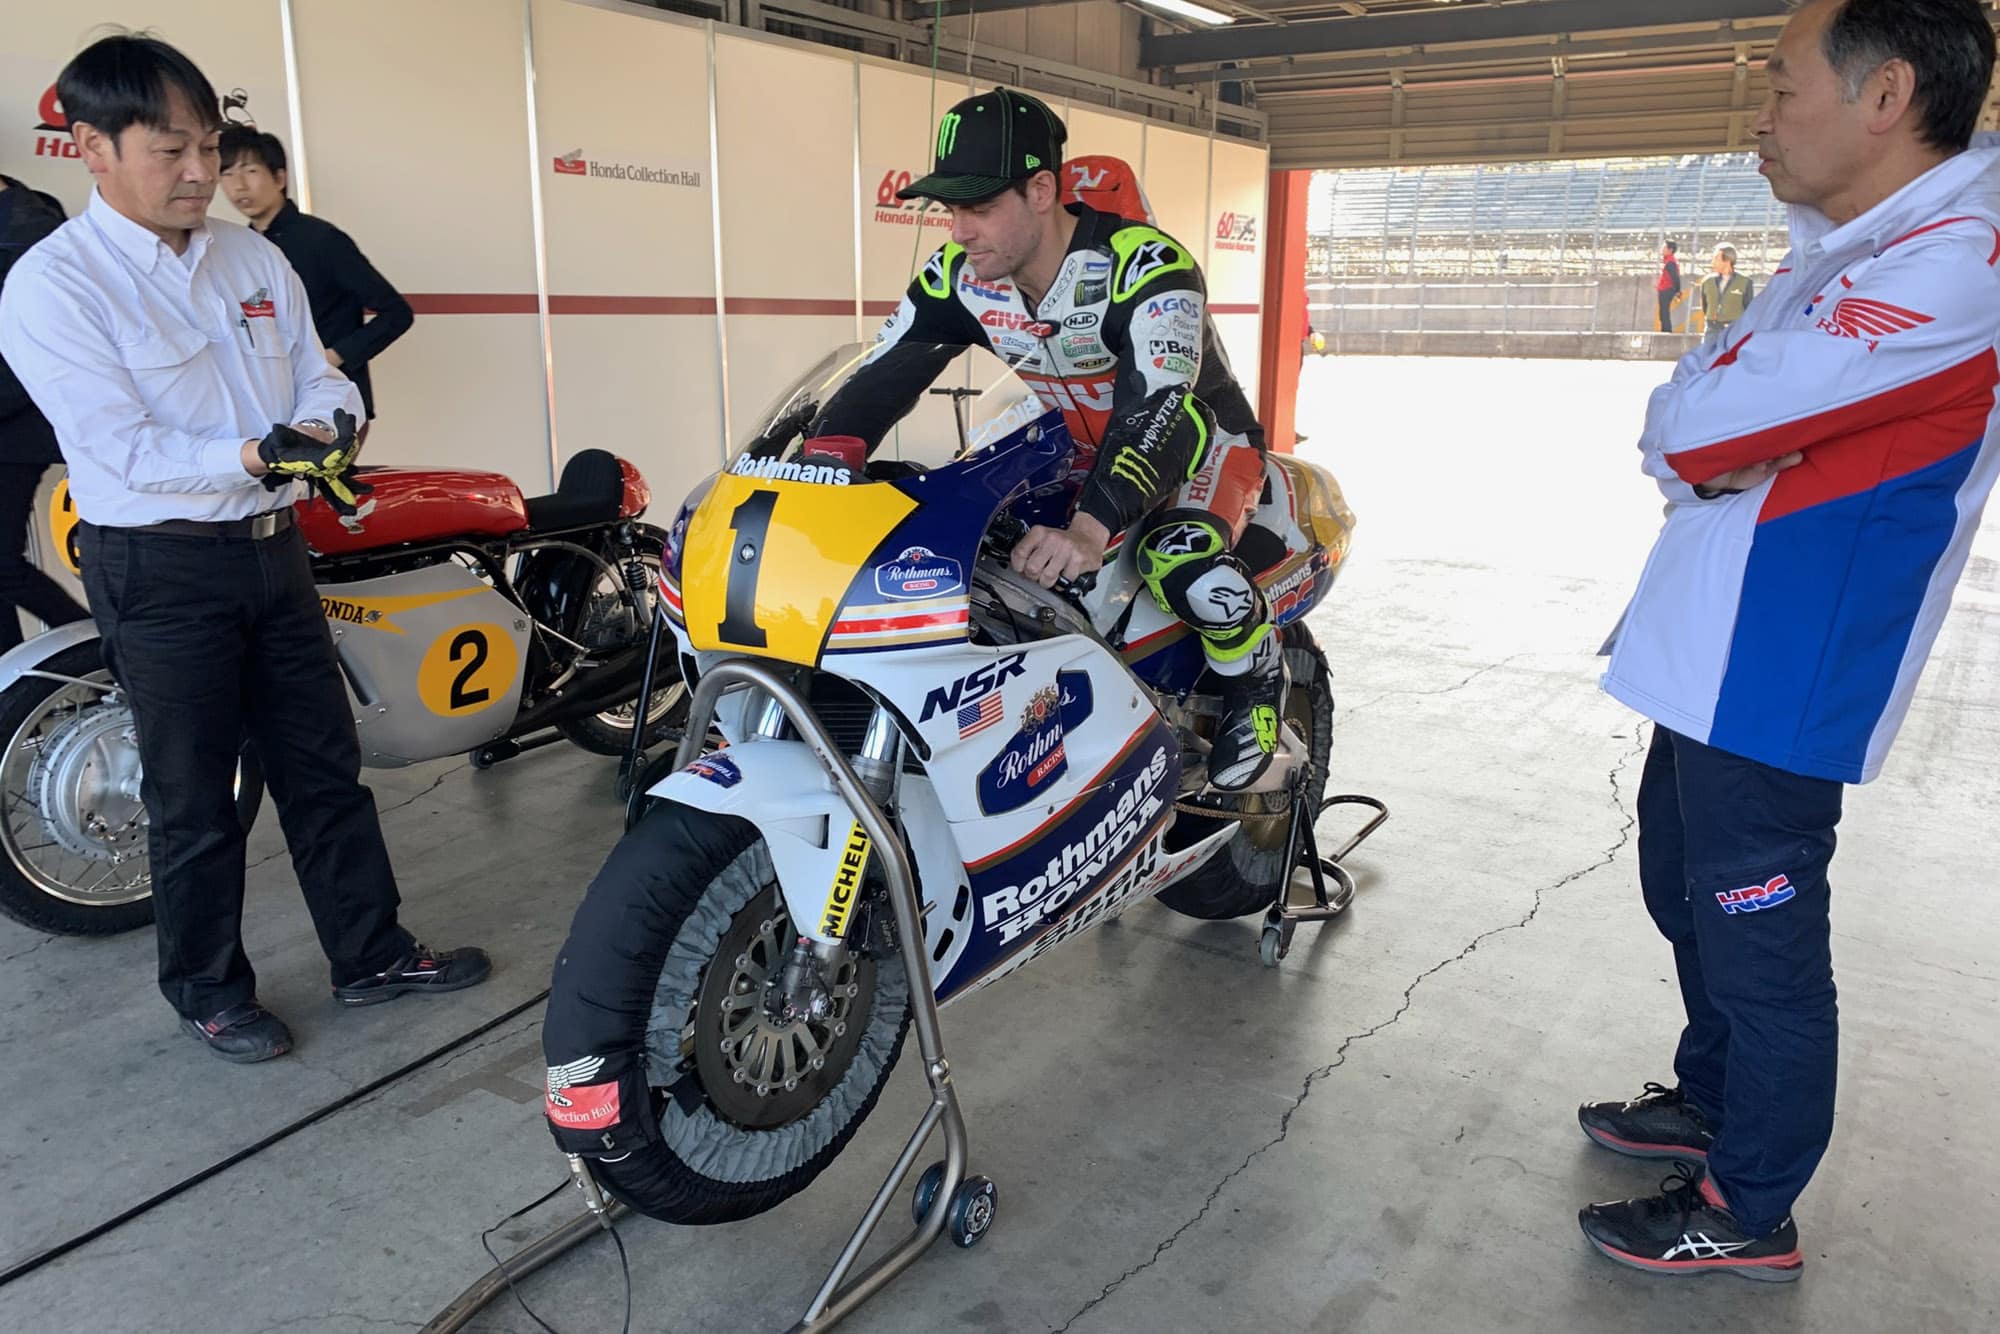 Cal Crutchlow on Eddie Lawson's Honda NSR500 in the pits during the Honda Thanks Day 2019